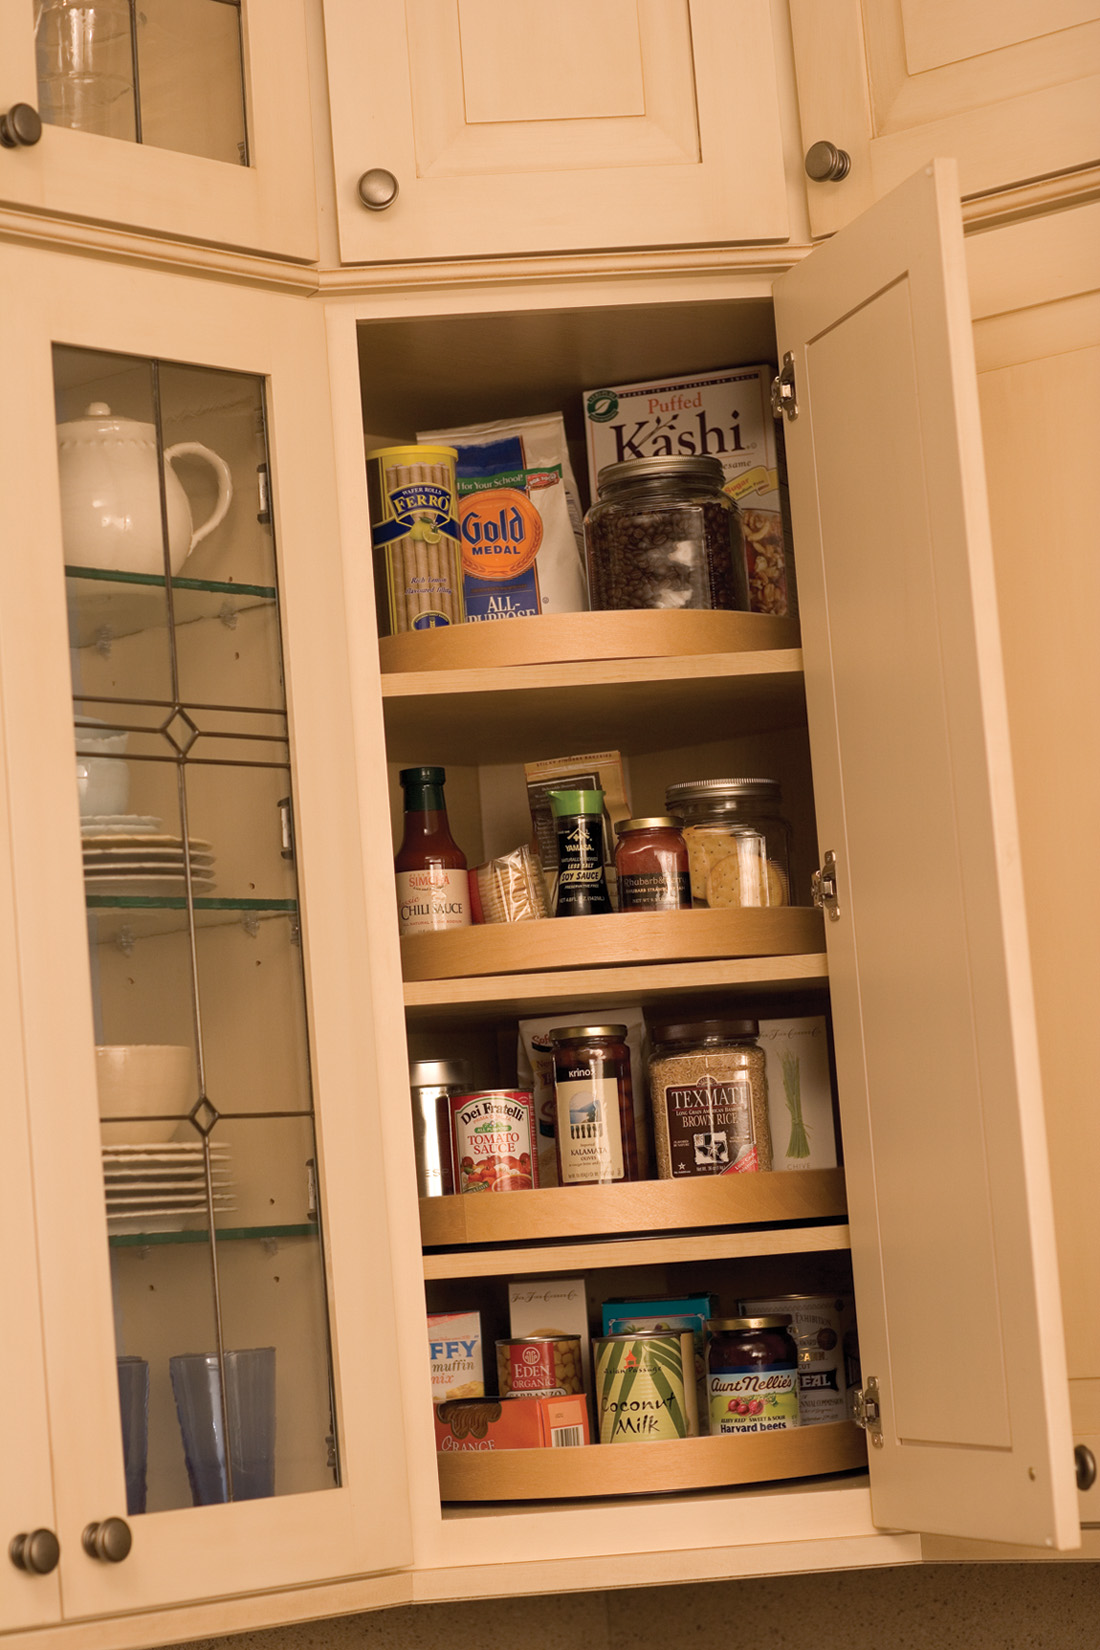 Kitchen Corner Cabinet Storage Ideas from Dura Supreme Cabinetry. A corner lazy susan in a wall cabinet.